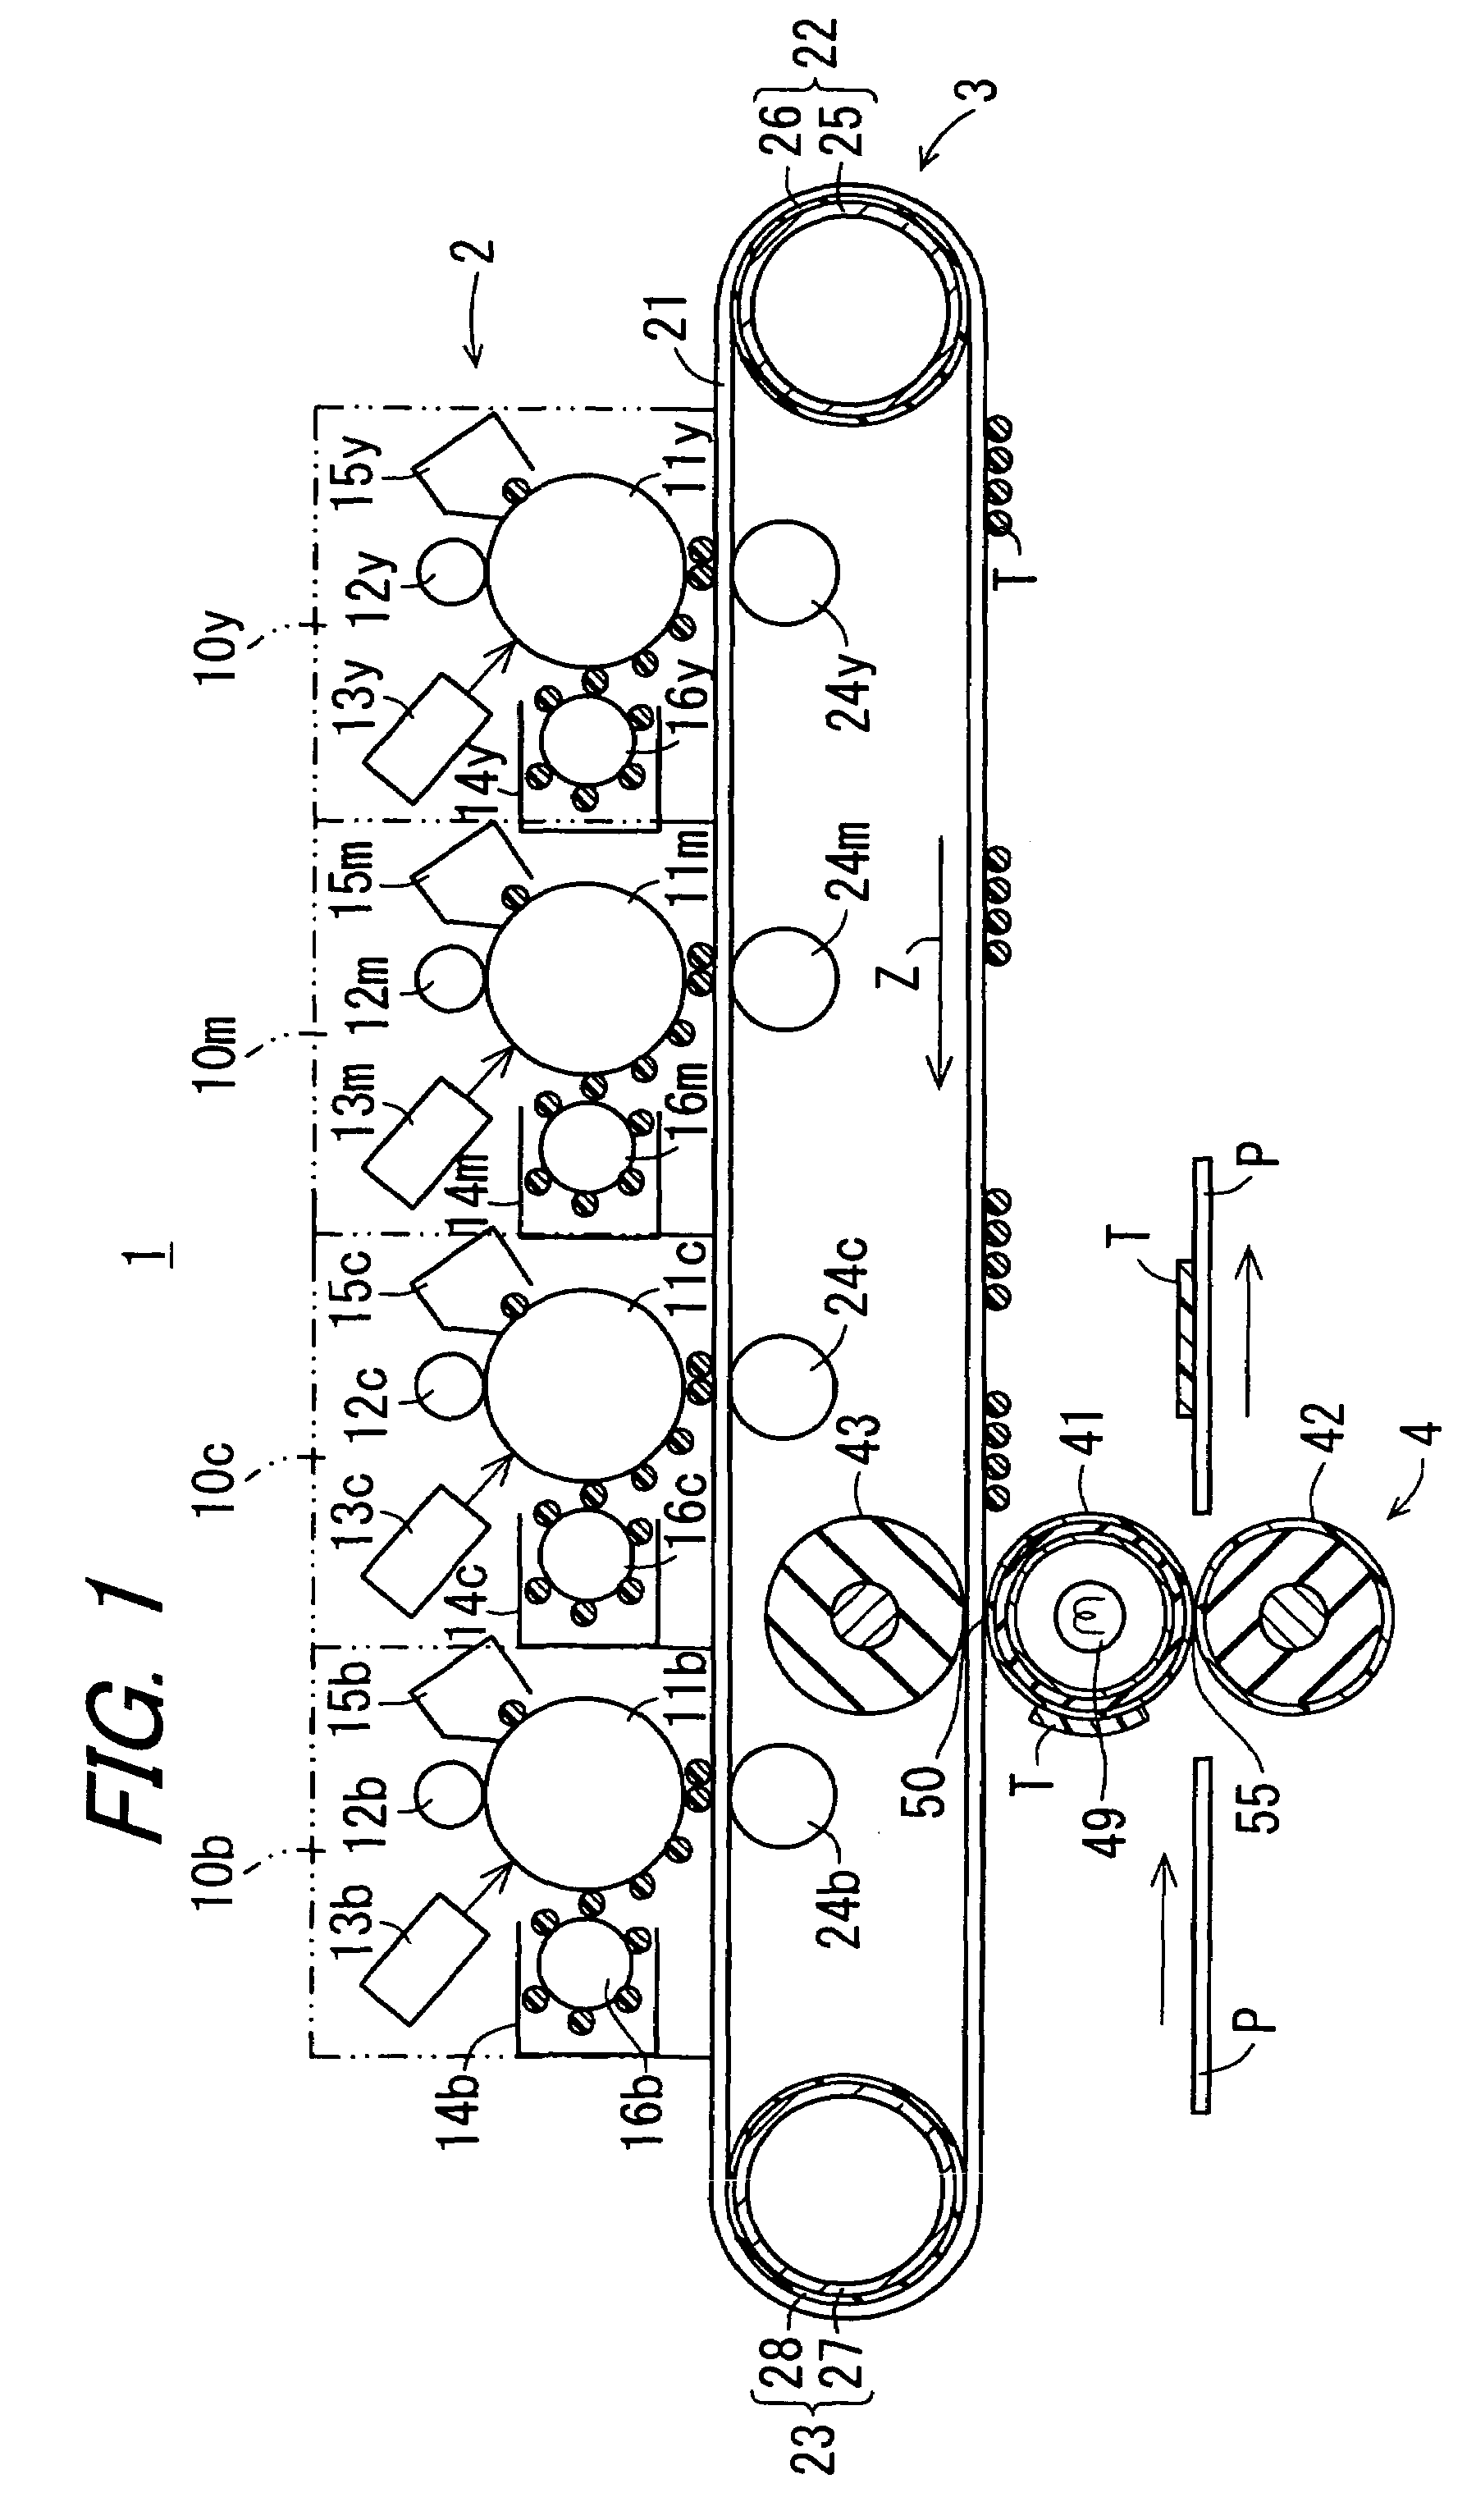 Image forming apparatus with increased transfer efficiency